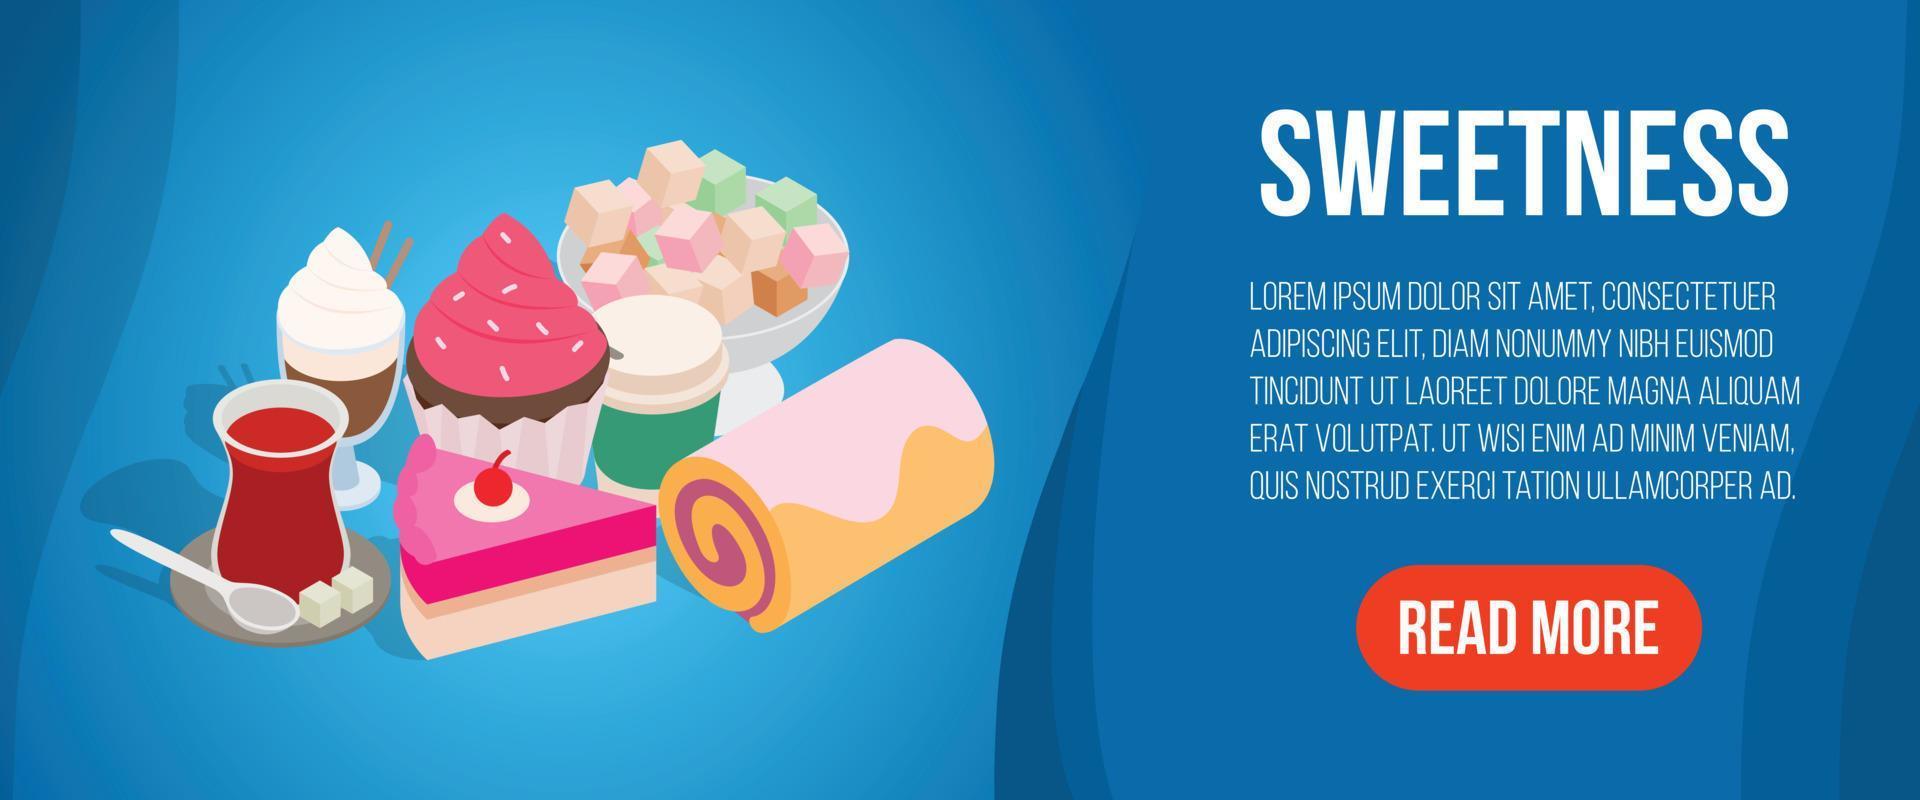 Sweetness concept banner, isometric style vector